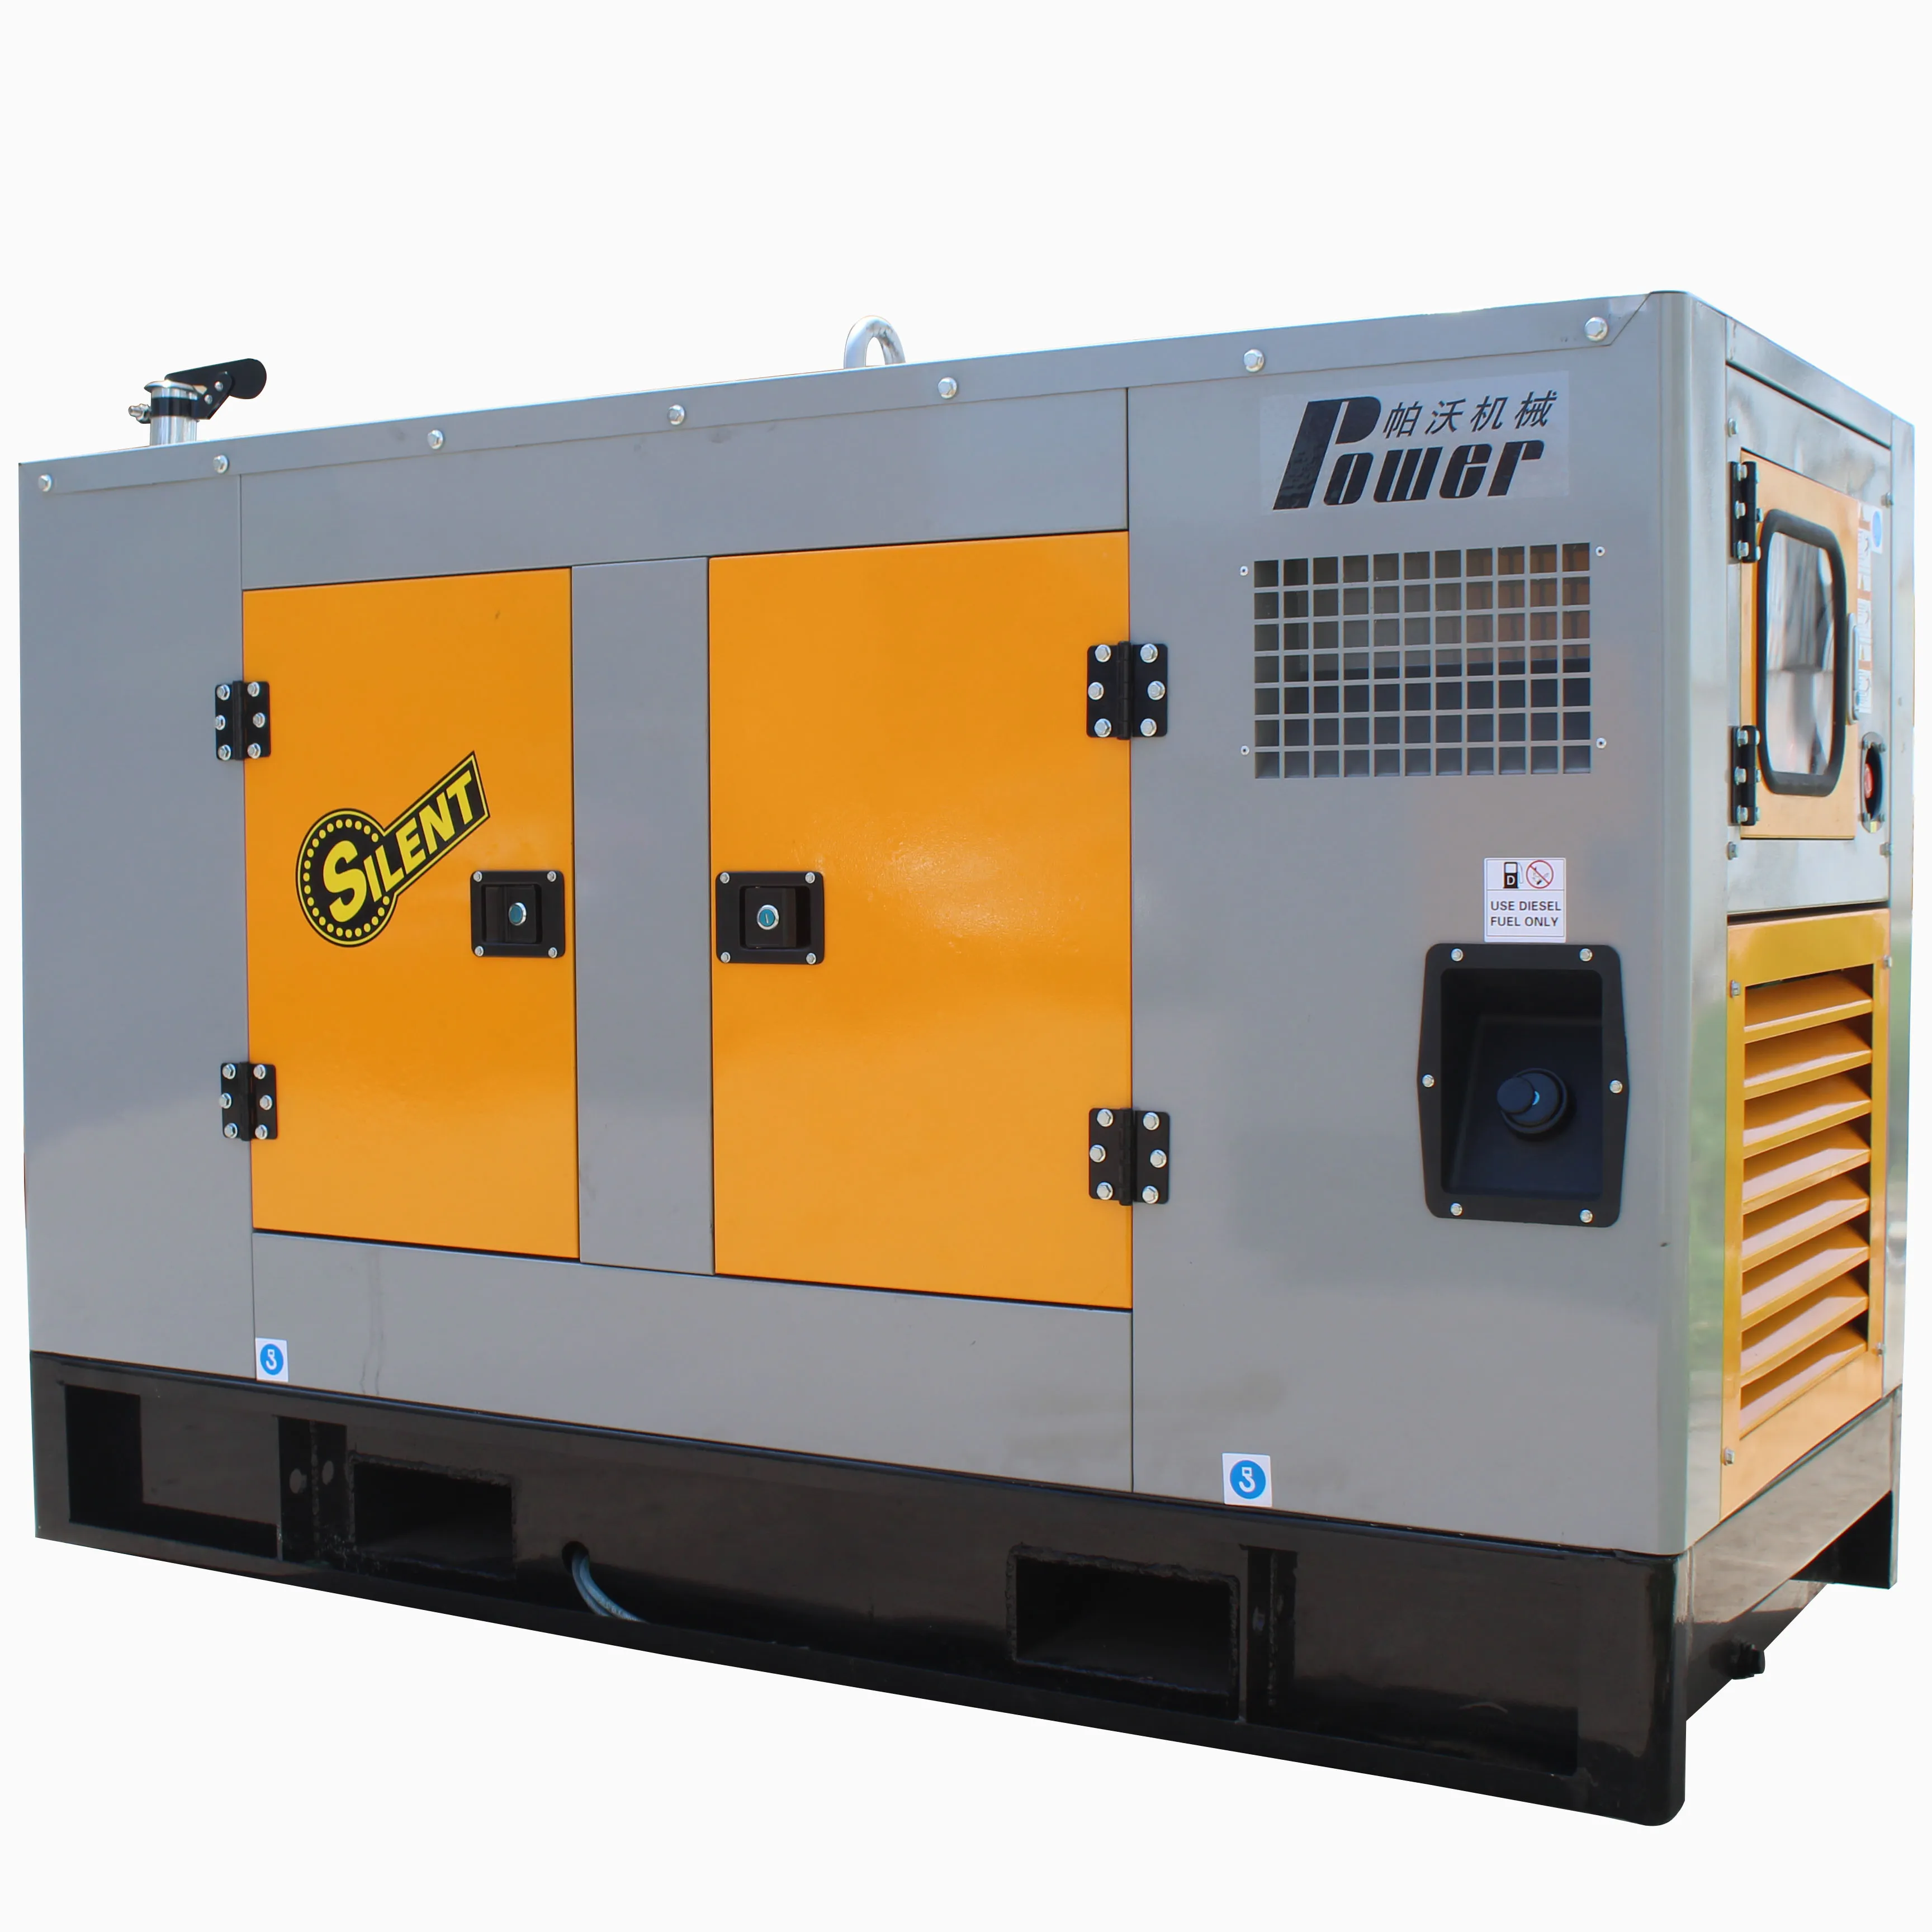 Silent diesel genset and mobile power station